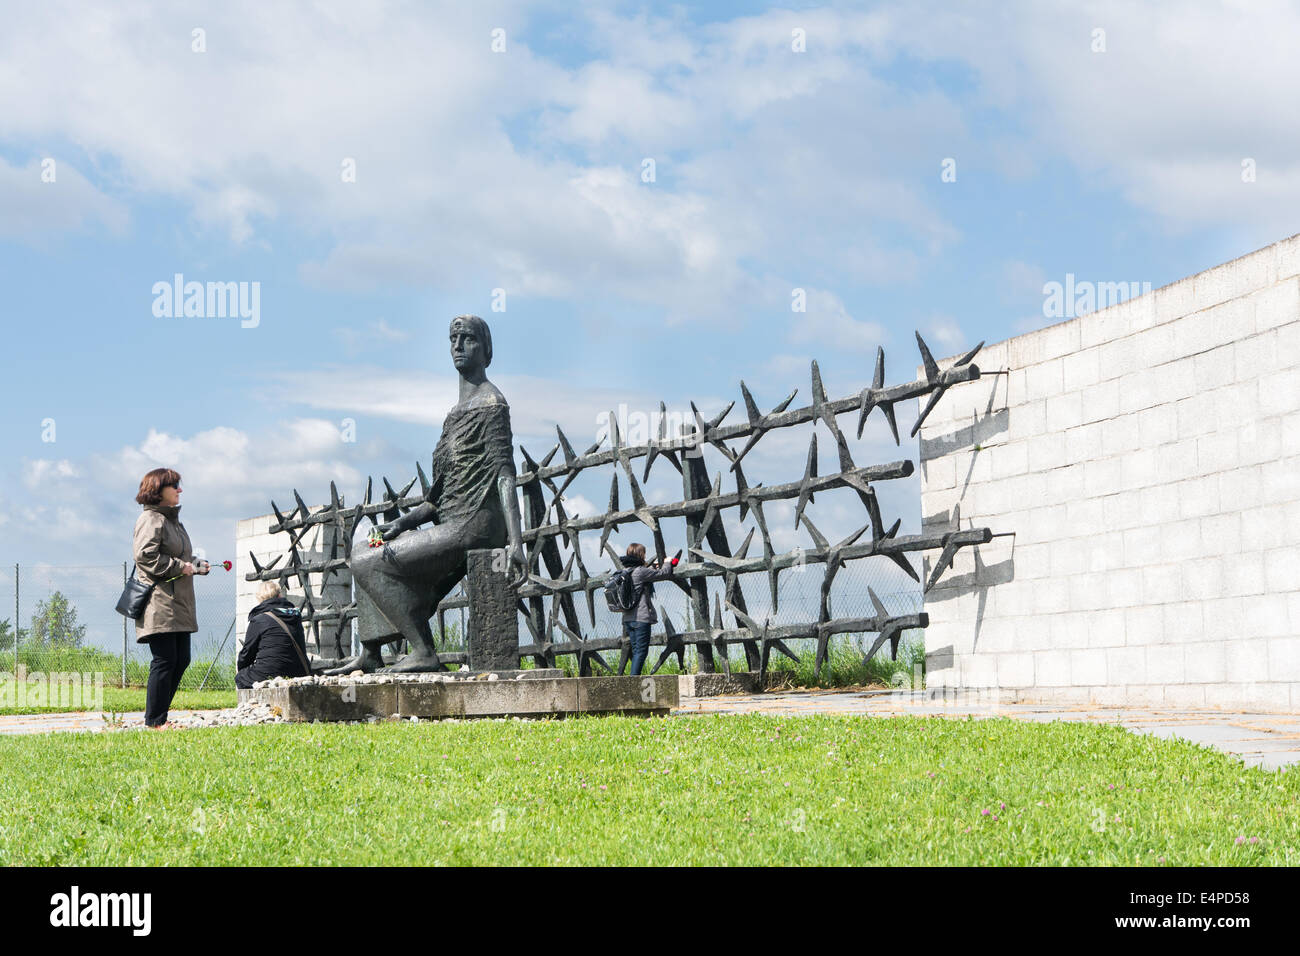 Mauthausen,Austria-May 10,2014:people admire one of the more monument before entering the camp during a cloudy day Stock Photo